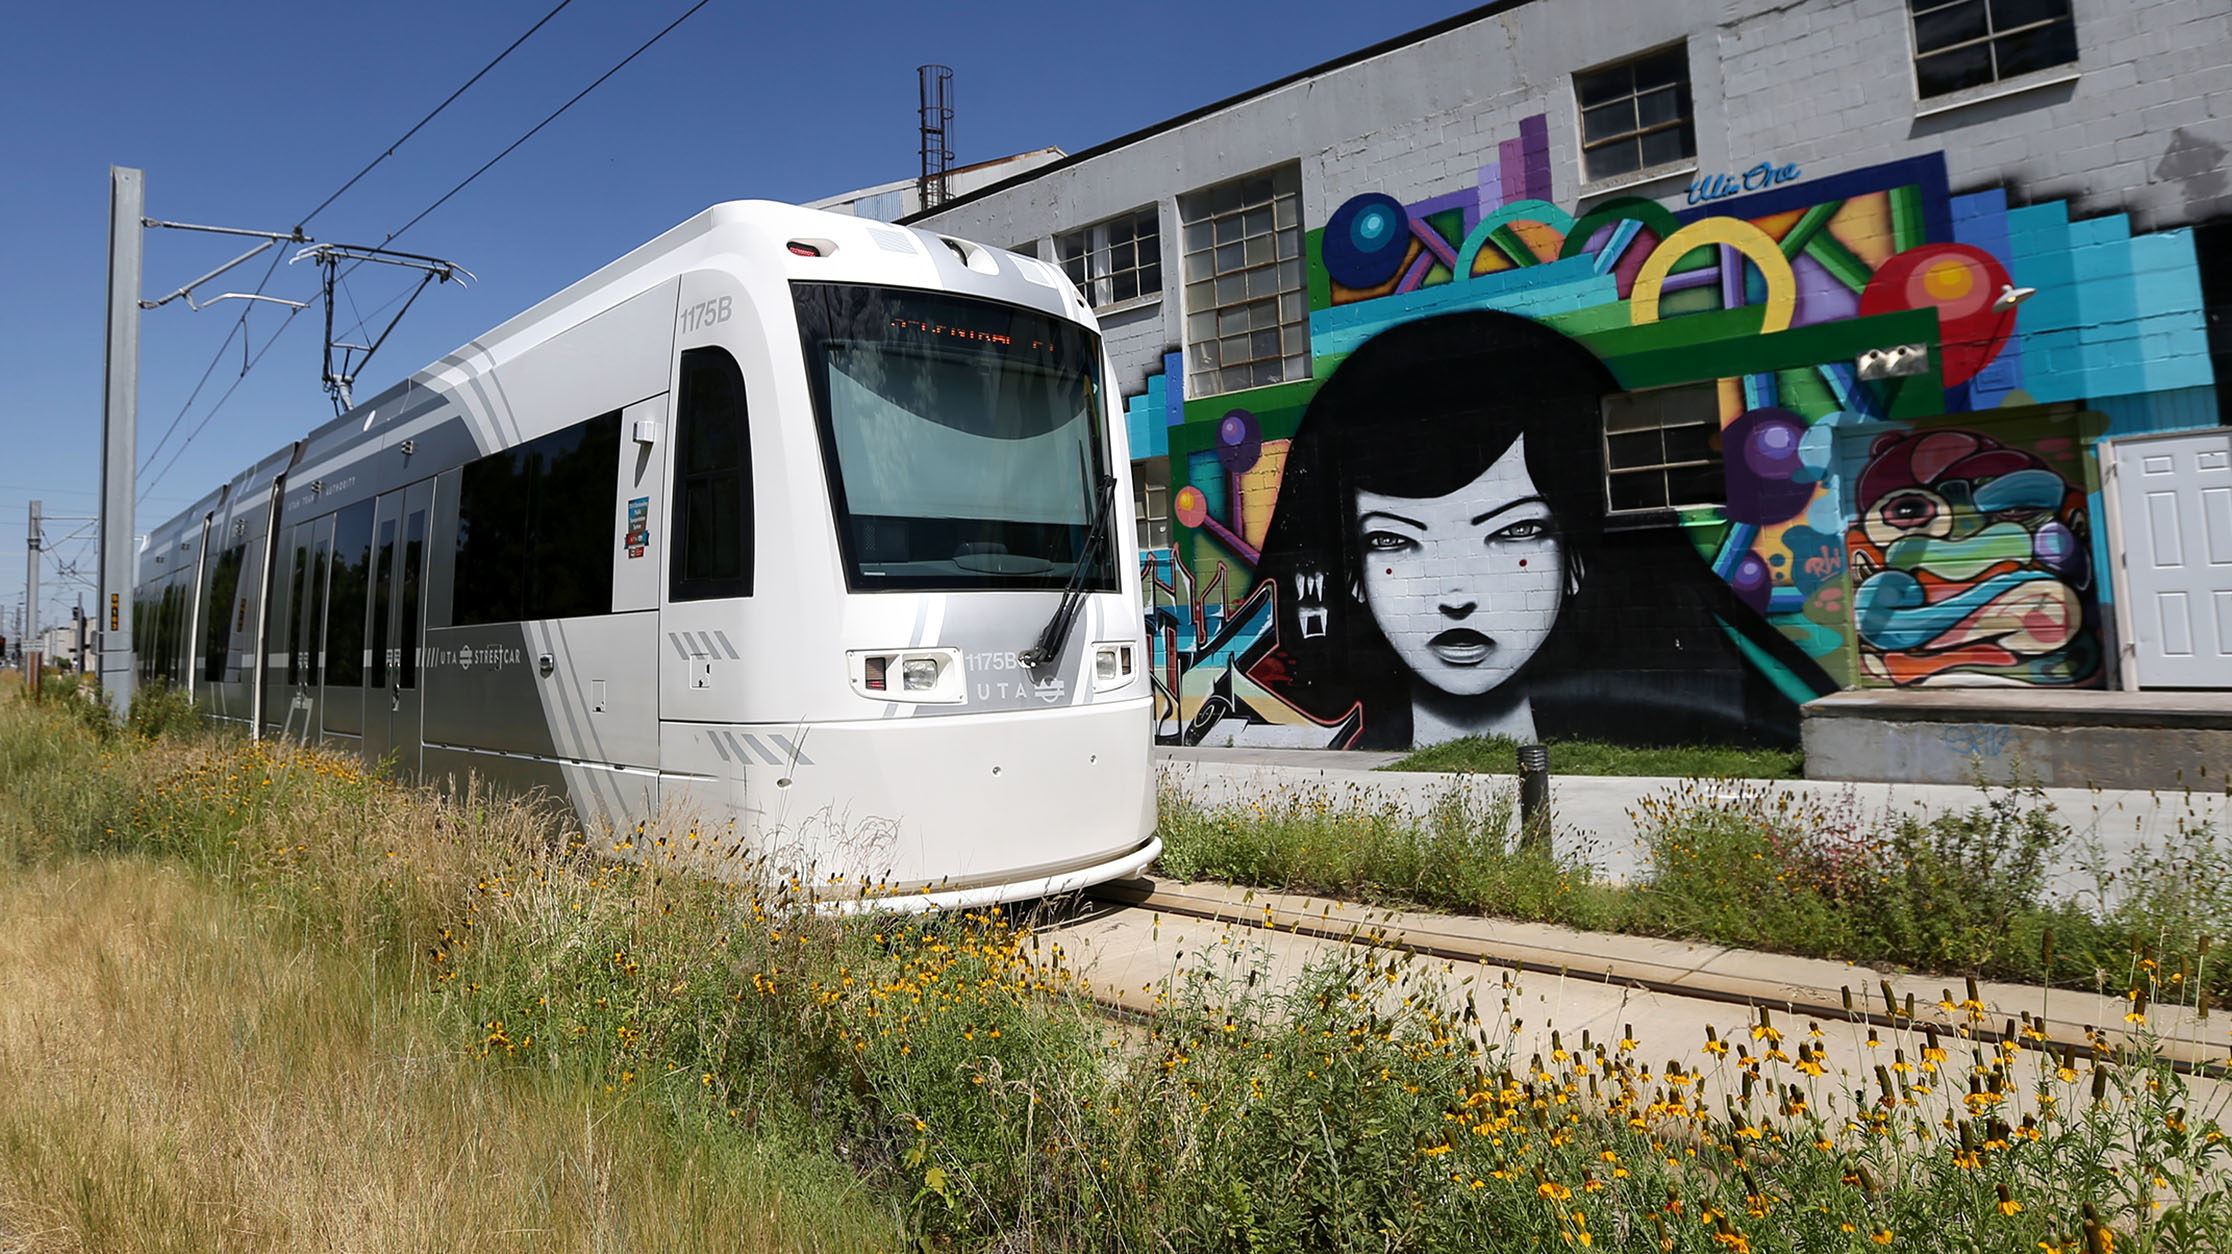 the s-line streetcar is pictured...